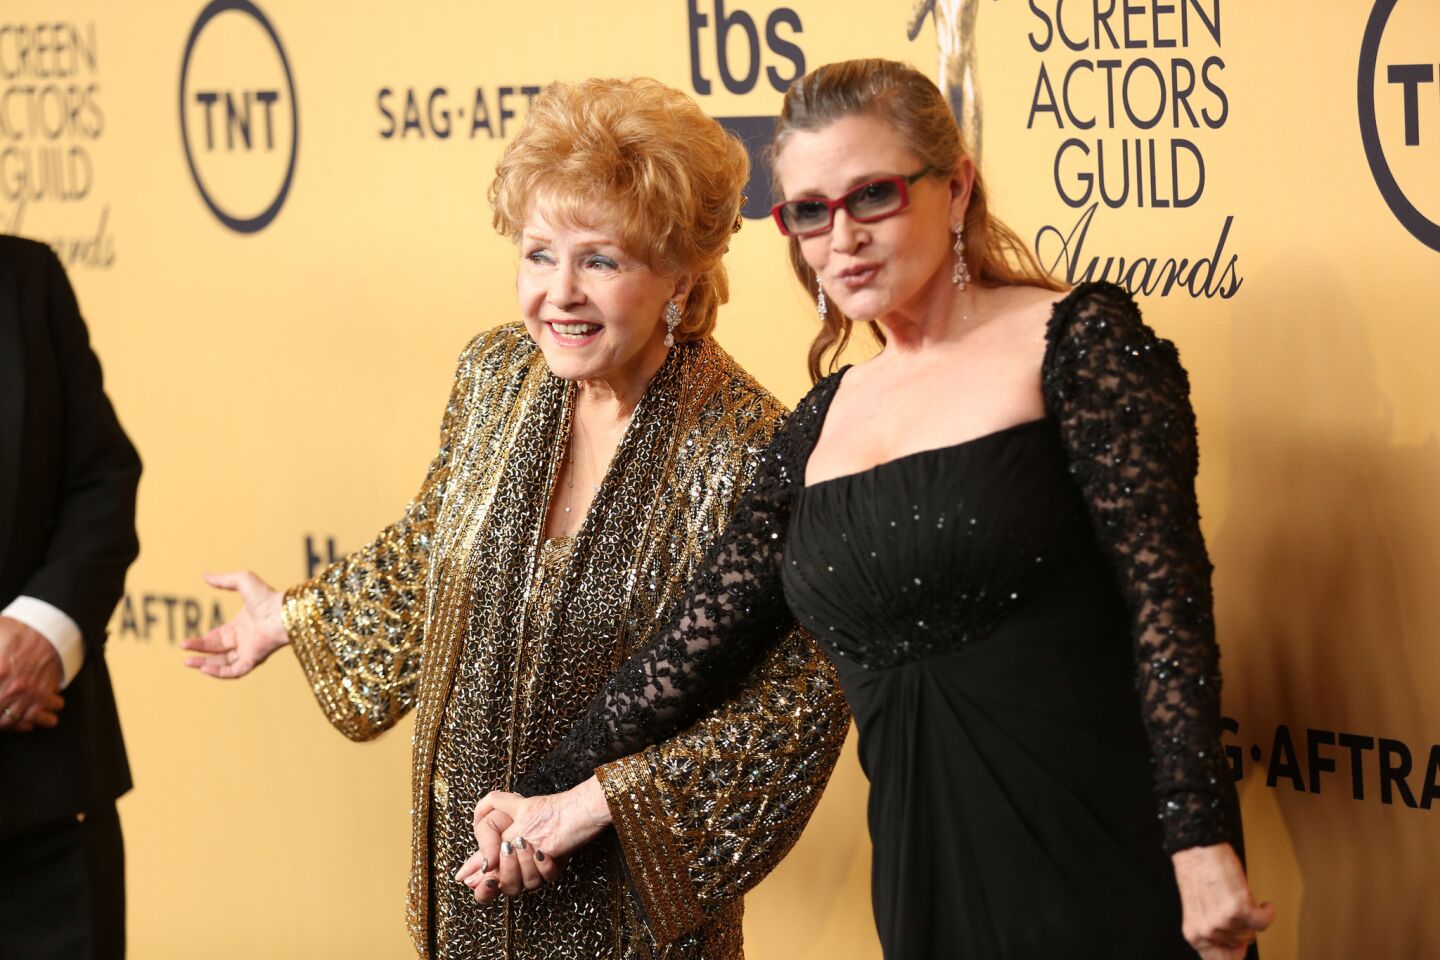 Carrie Fisher, right, with her mother, Debbie Reynolds, at the 21st Screen Actors Guild Awards in Los Angeles on Jan. 25, 2015.